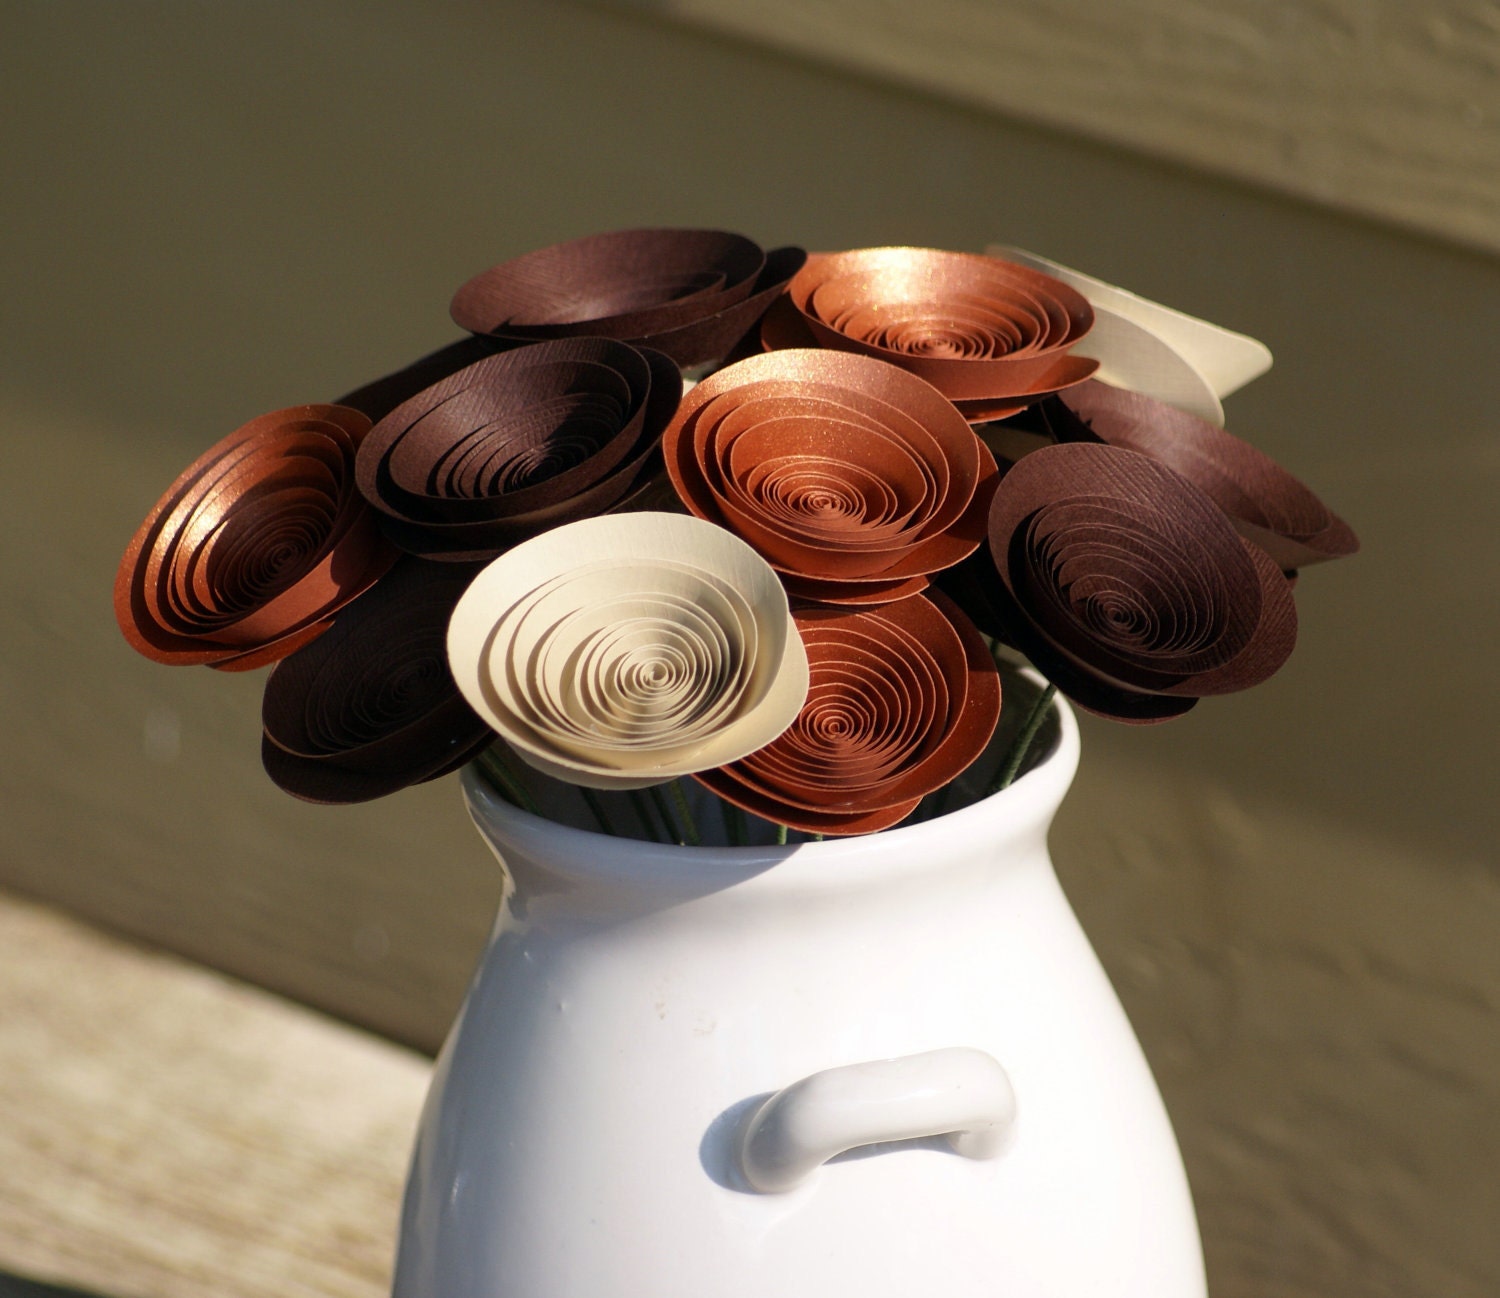 Chic Paper Flowers in Chocolate Brown, Copper, and Cafe au Lait -- Metallic Centerpiece -- Nature Decor -- Neutral Colors